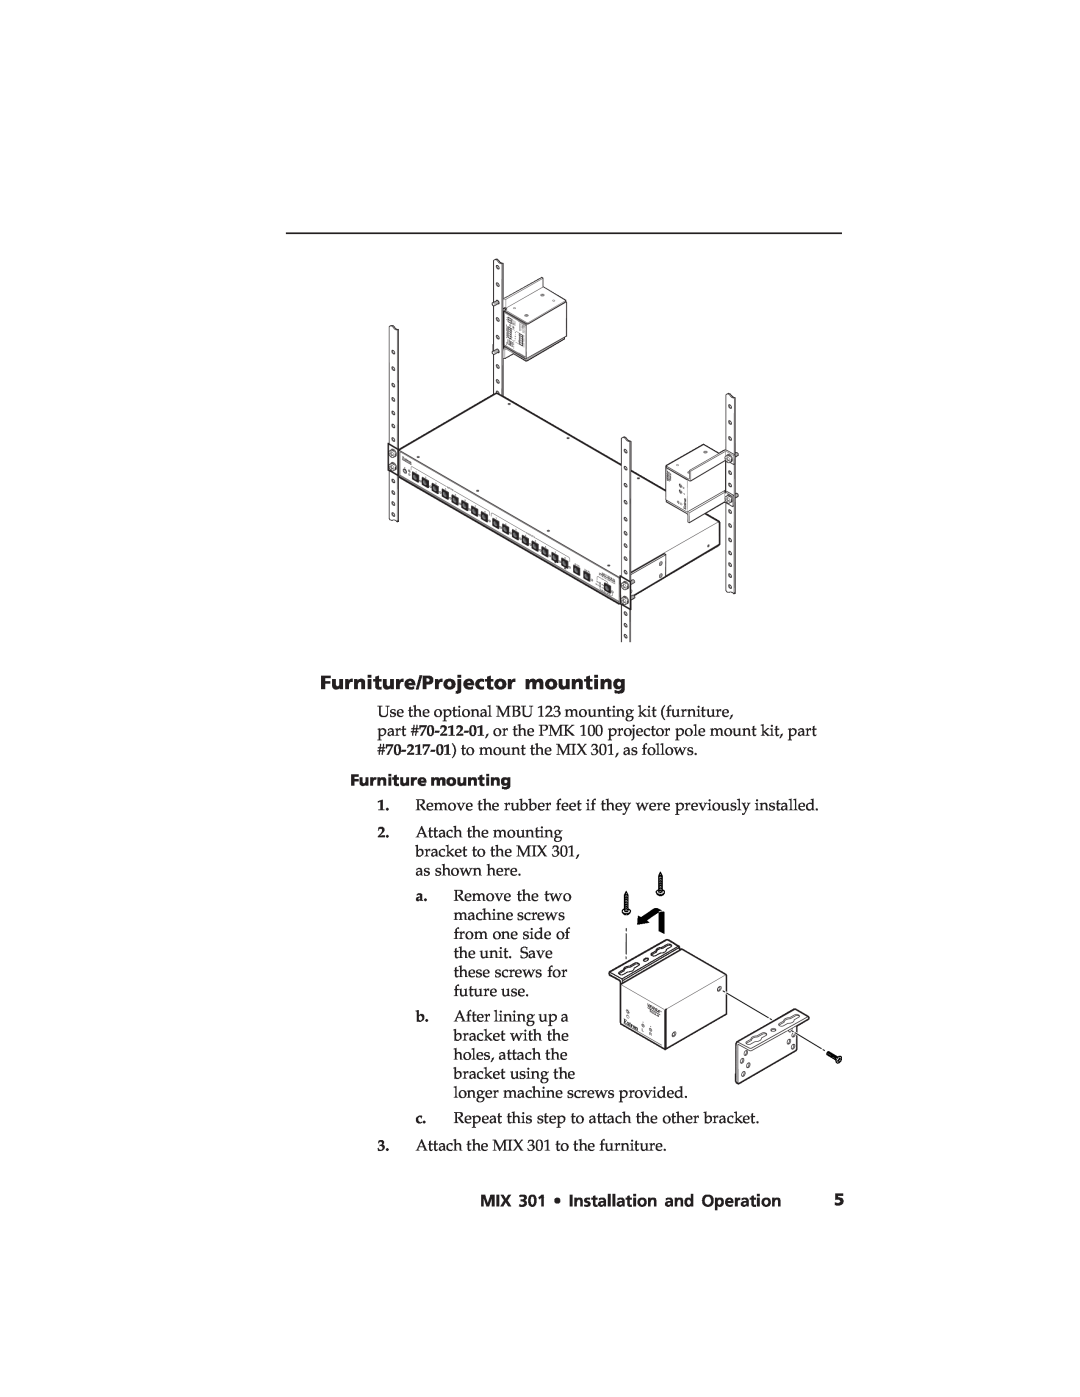 Extron electronic user manual Furniture/Projector mounting, Furniture mounting, MIX 301 Installation and Operation 